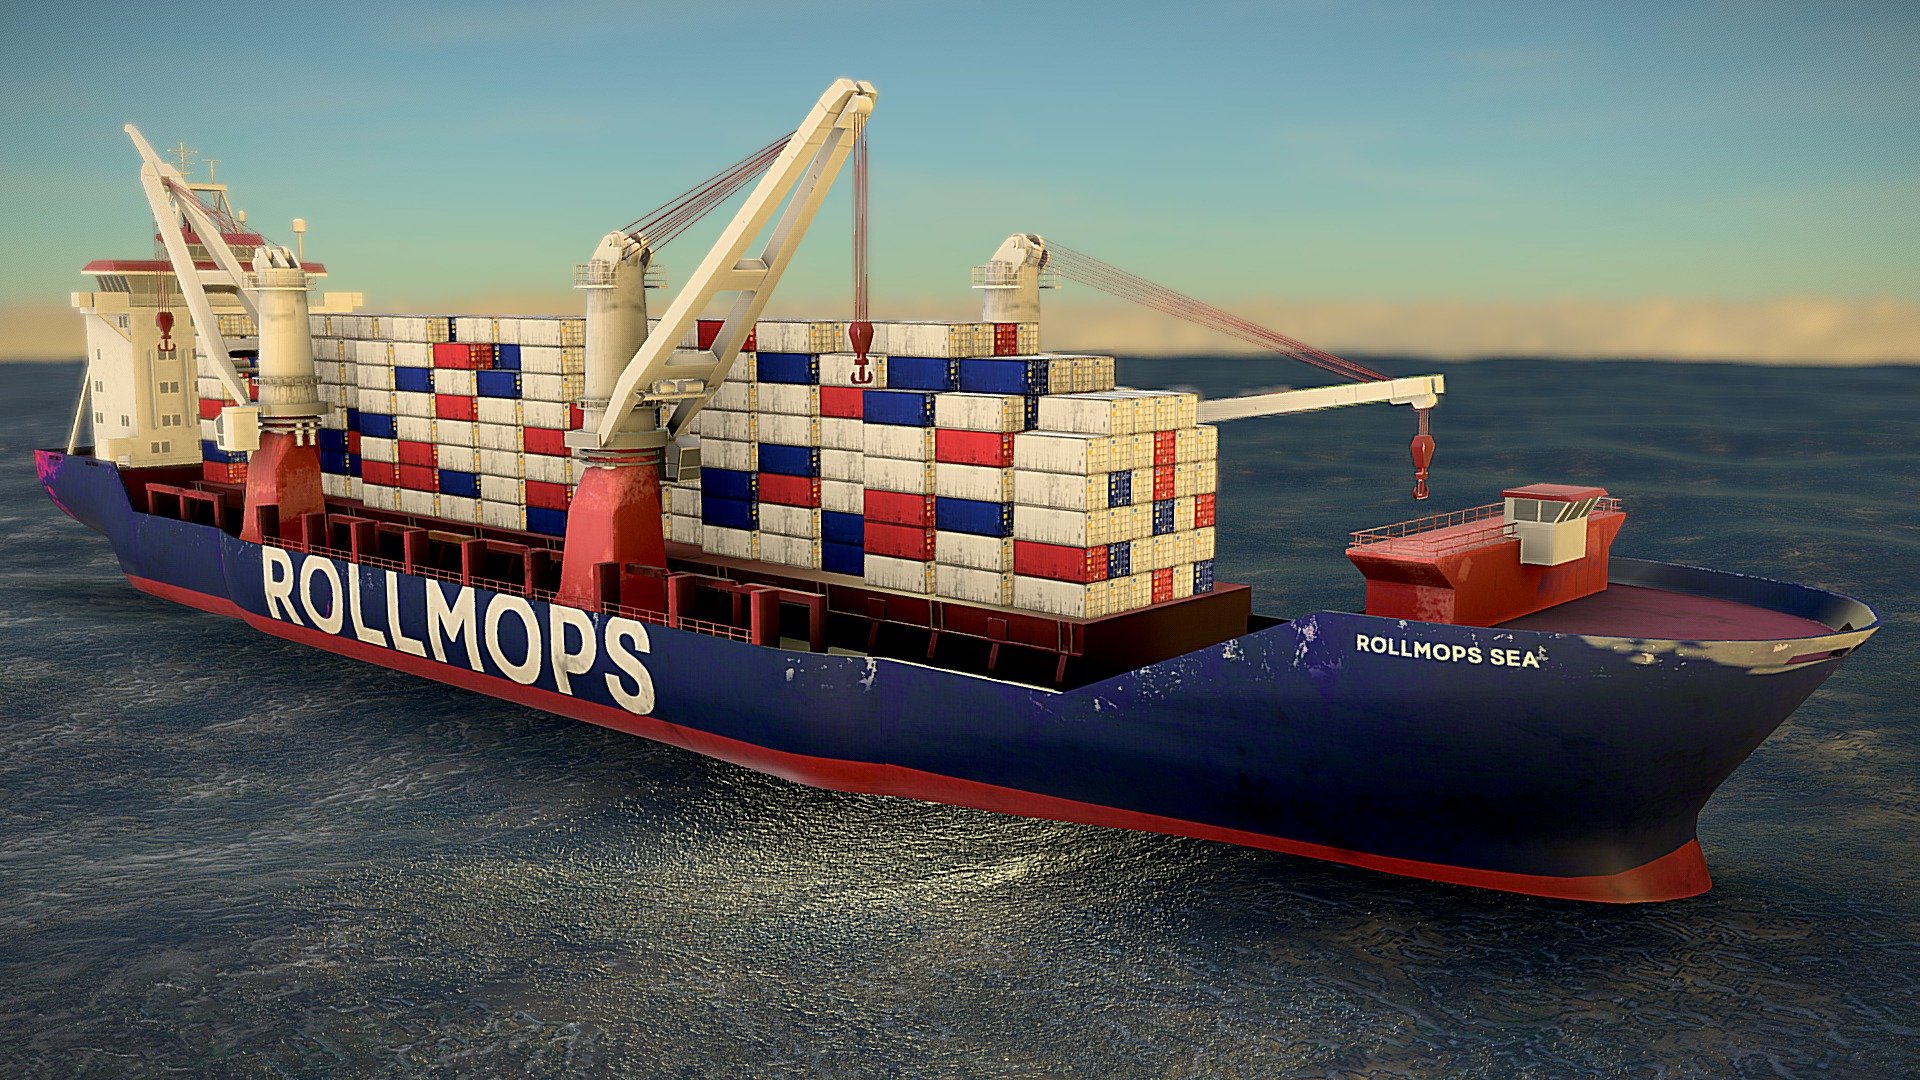 Realtime optimized, low poly Cargo Ship with Rollmops livery (fictive). This asset is available for purchase here: https://skfb.ly/oS7tE - Low Poly Cargo Ship - Rollmops Livery - Buy Royalty Free 3D model by cgamp.com (@cgamp) 3d model